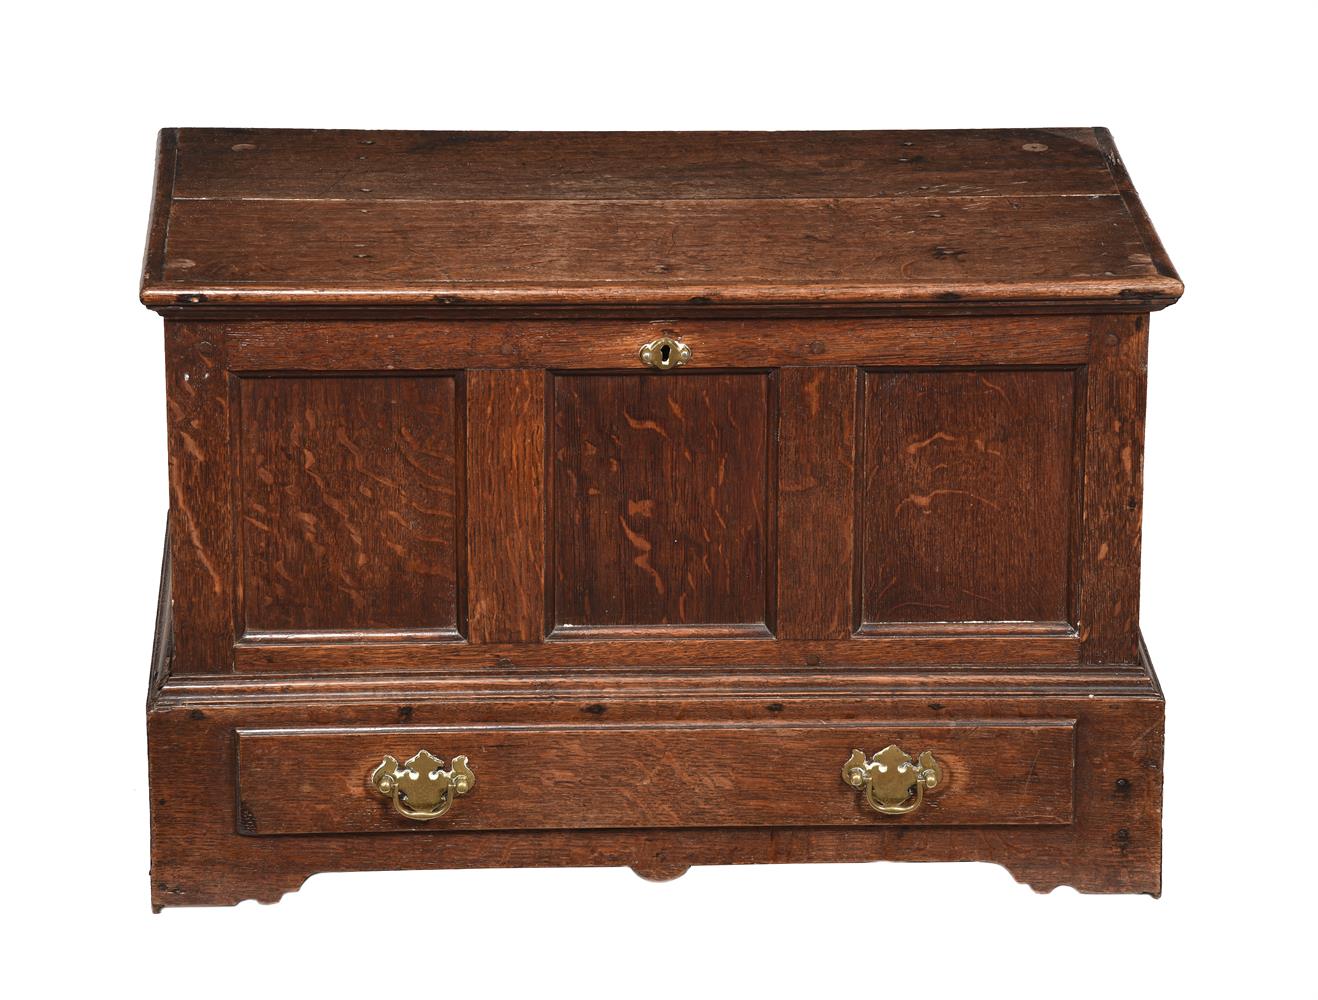 A GEORGE III WELSH OAK COFFER BACHLATE 18TH CENTURY43cm x 64cm x 33cmProvenance: Private Collect